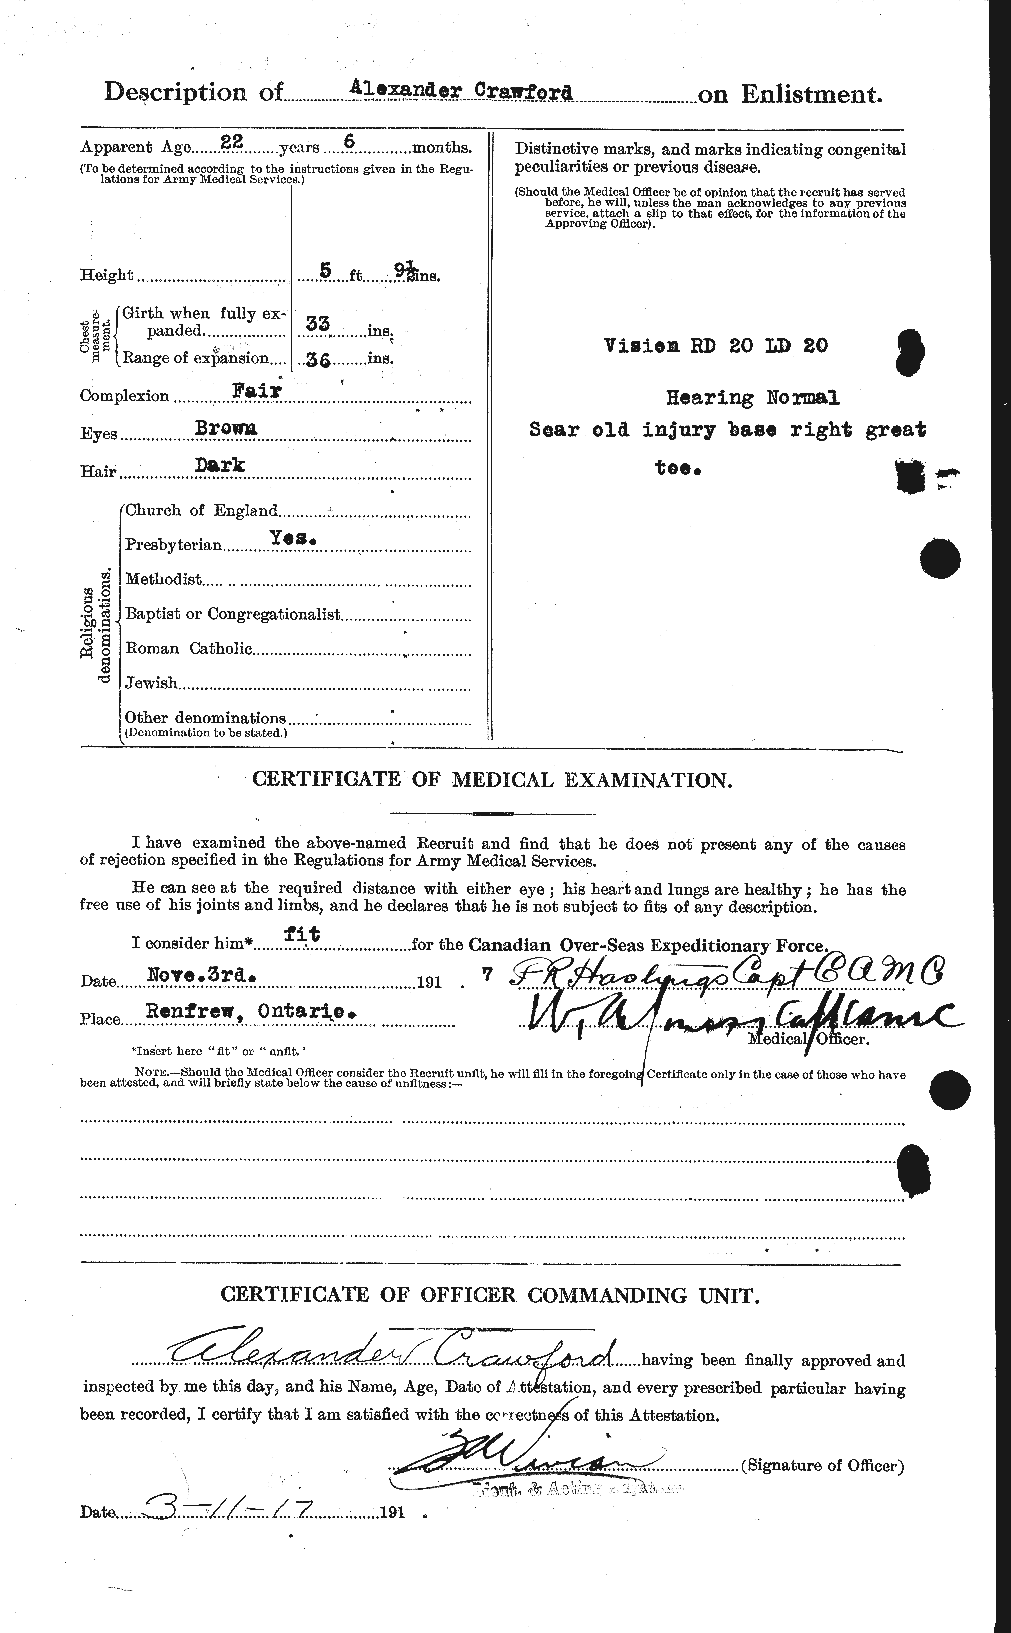 Personnel Records of the First World War - CEF 060961b